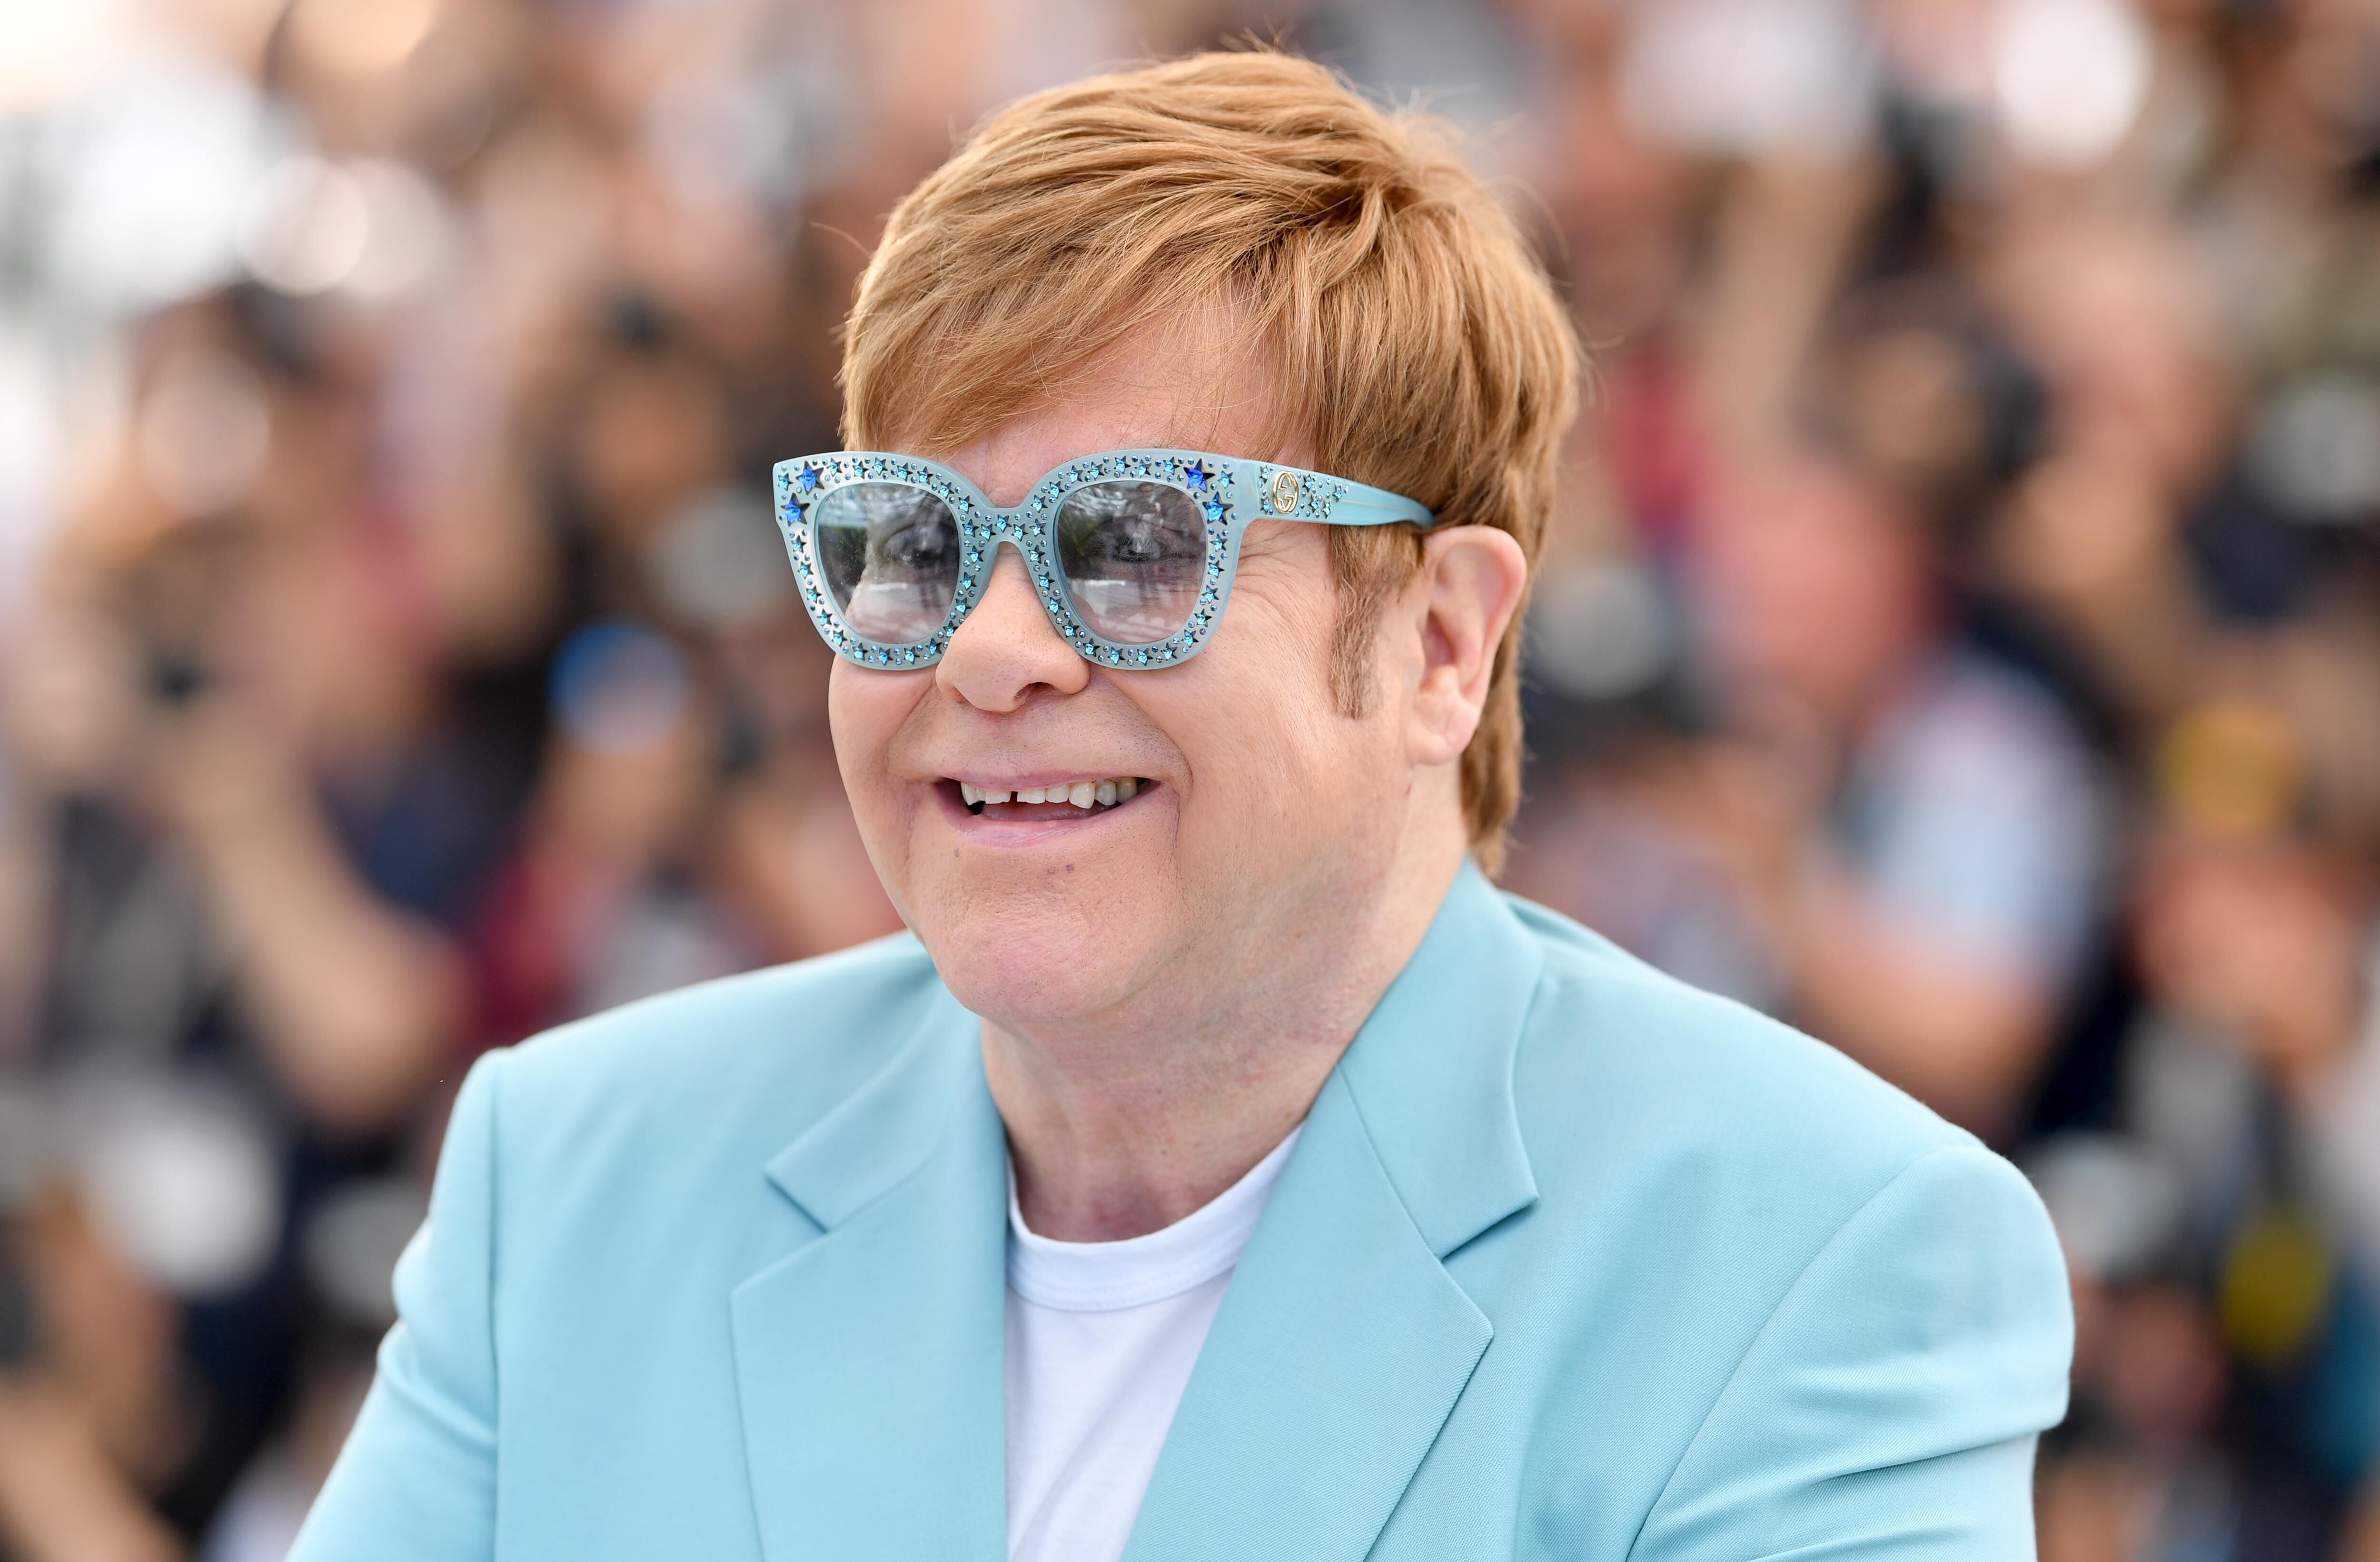 Sir Elton John attends the photocall for "Rocketman" during the 72nd annual Cannes Film Festival on May 16, 2019 | Photo: Getty Images